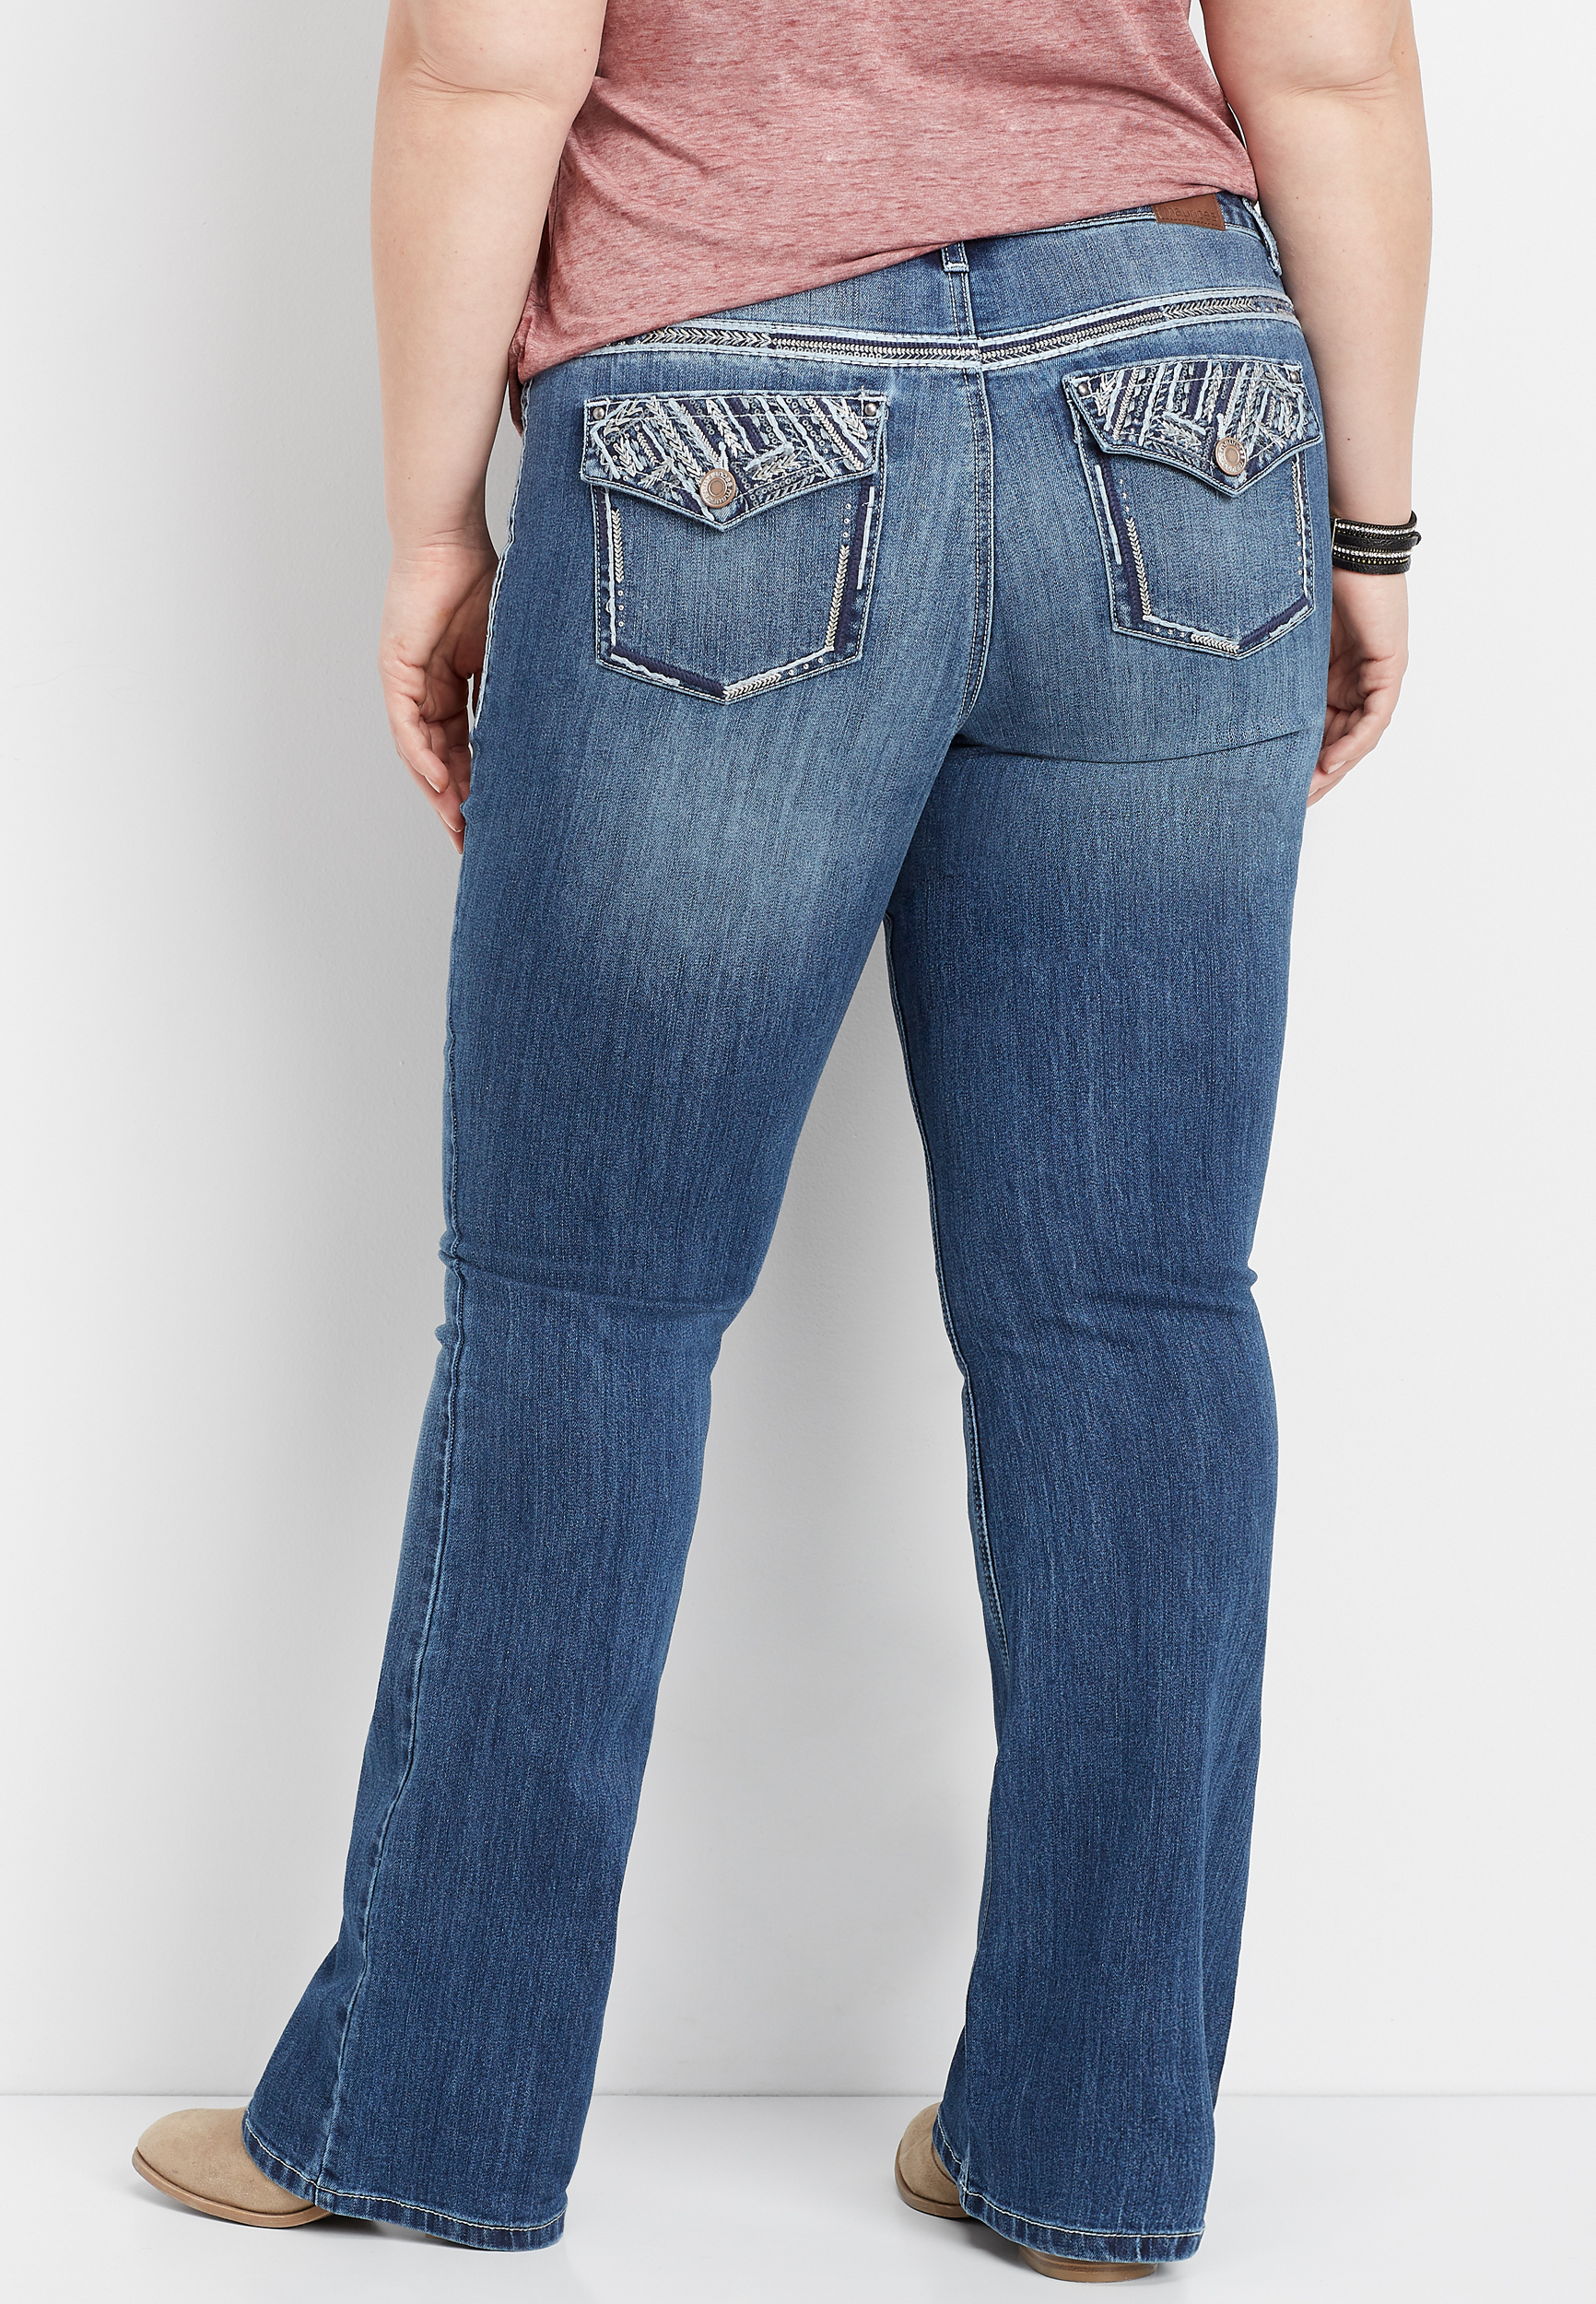 plus size bling jeans